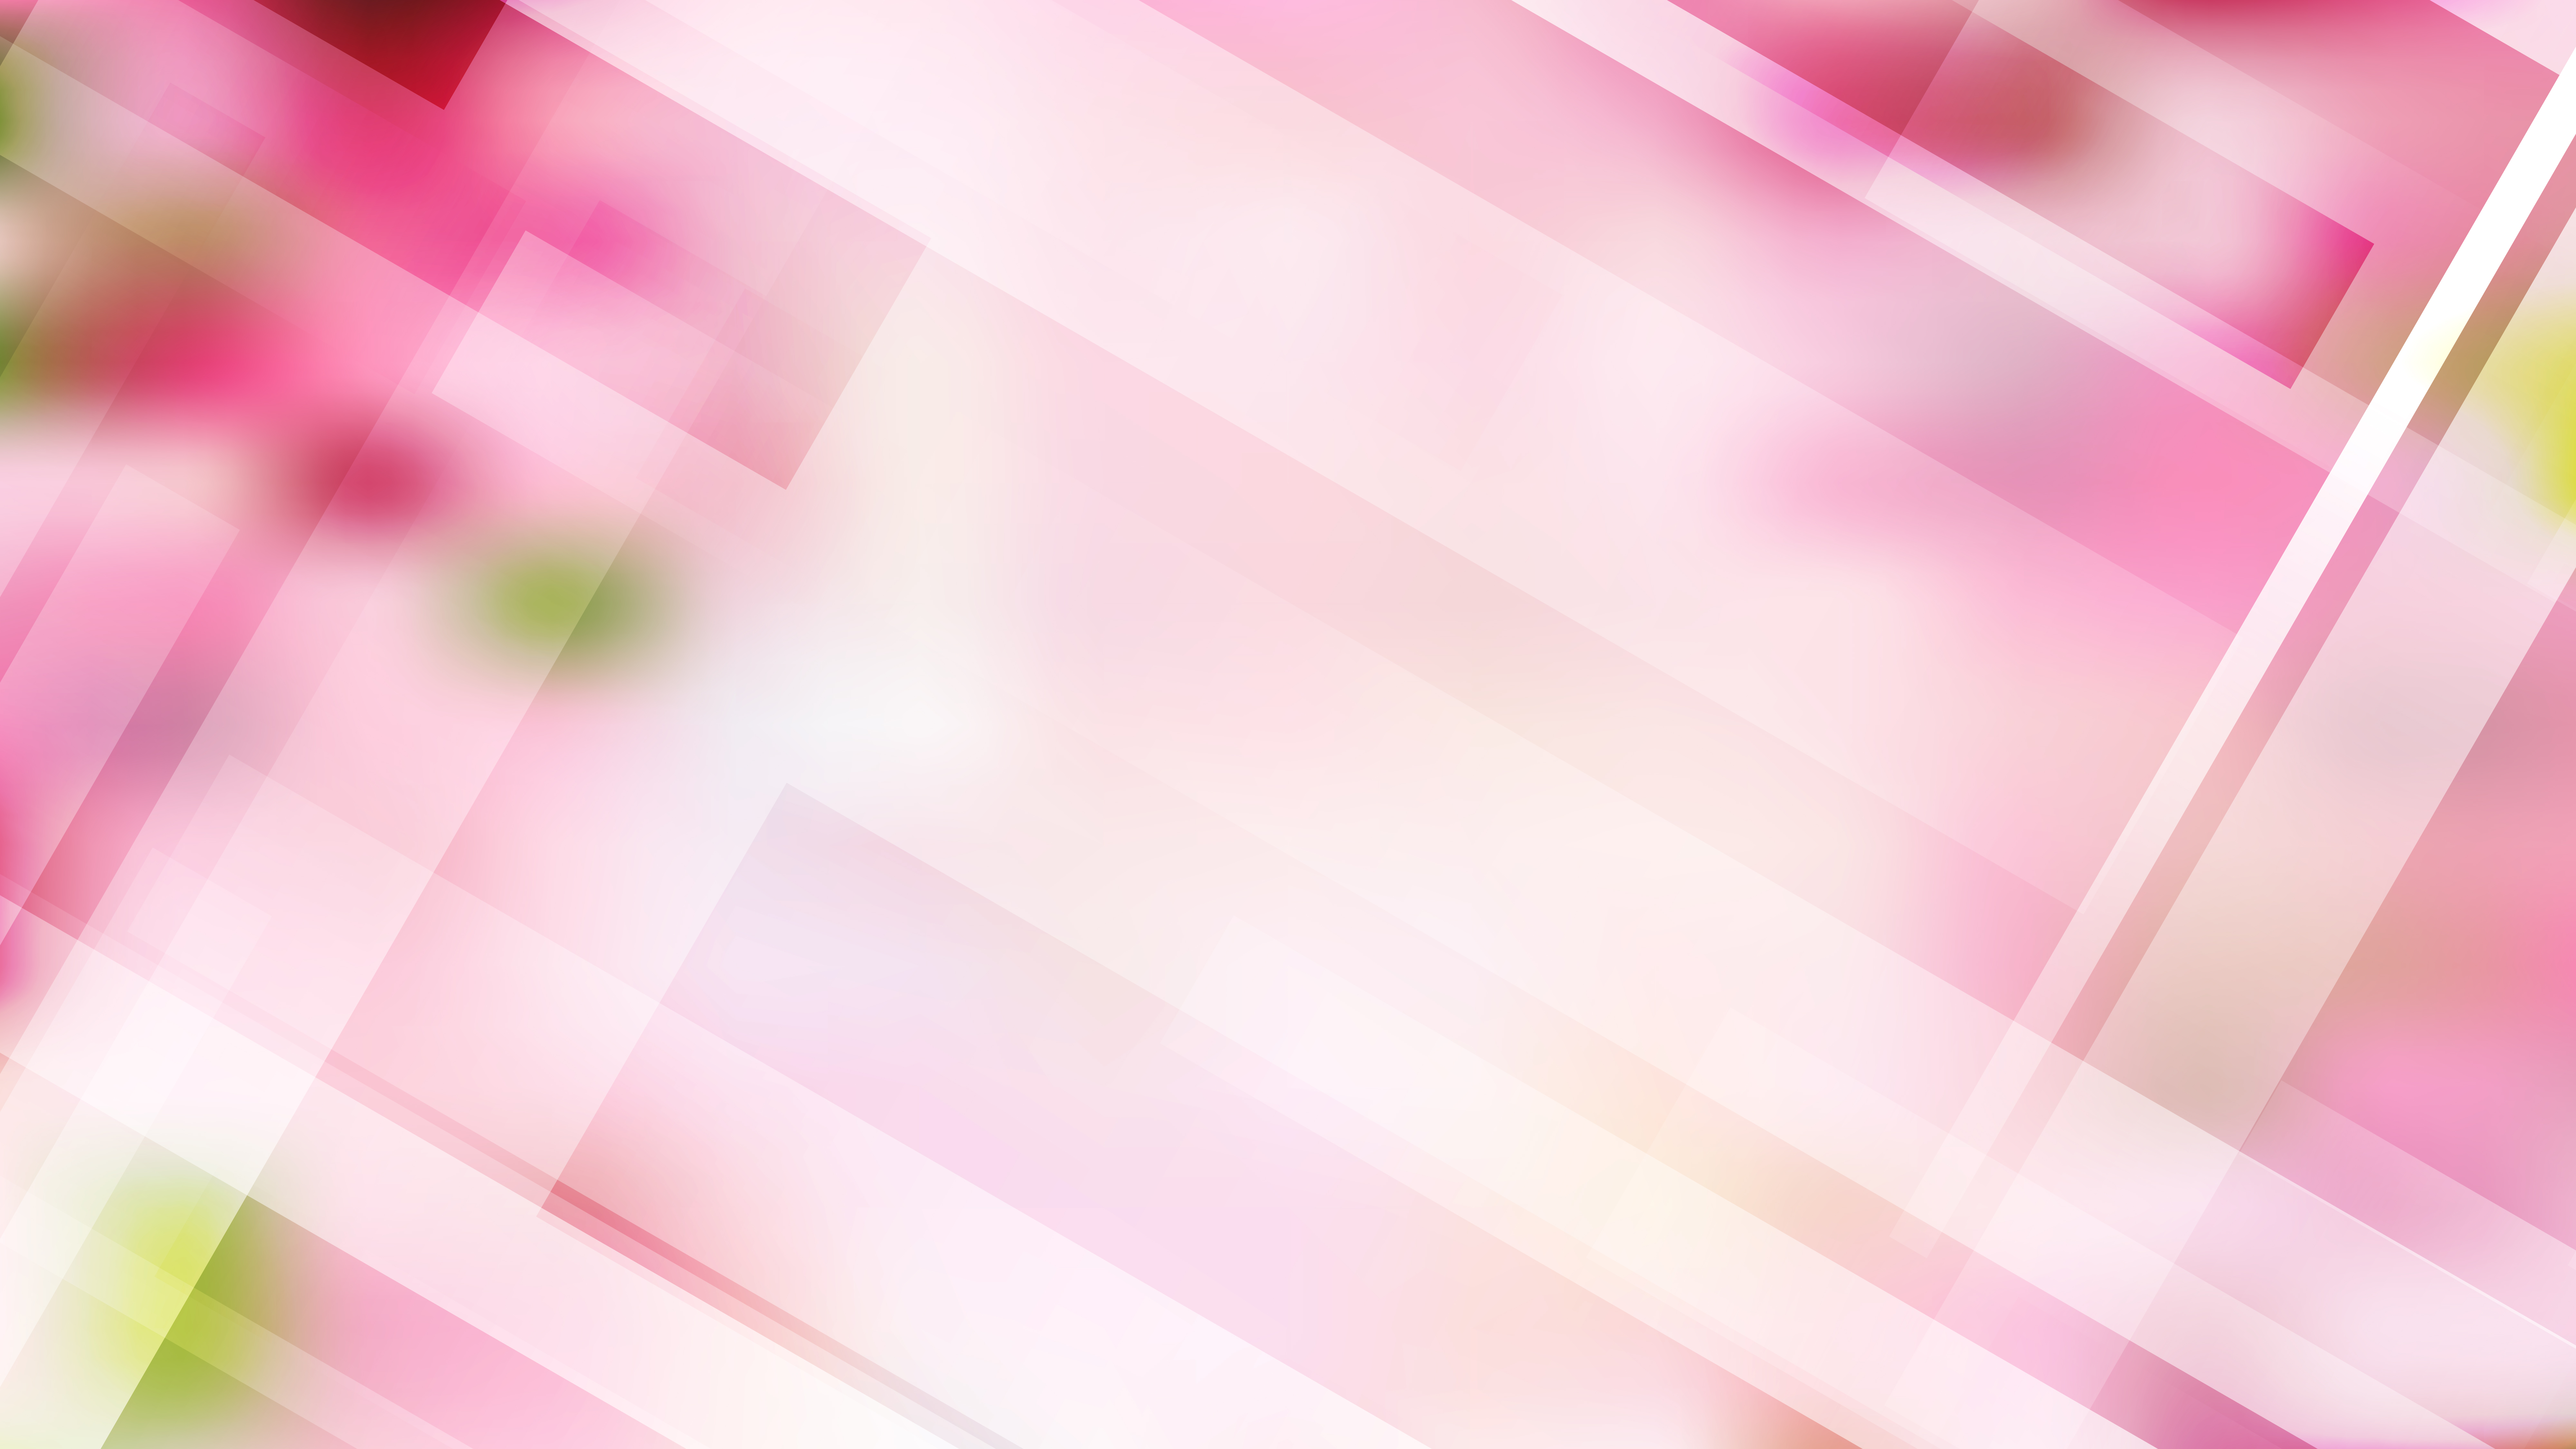 Pink white backgrounds Vectors & Illustrations for Free Download